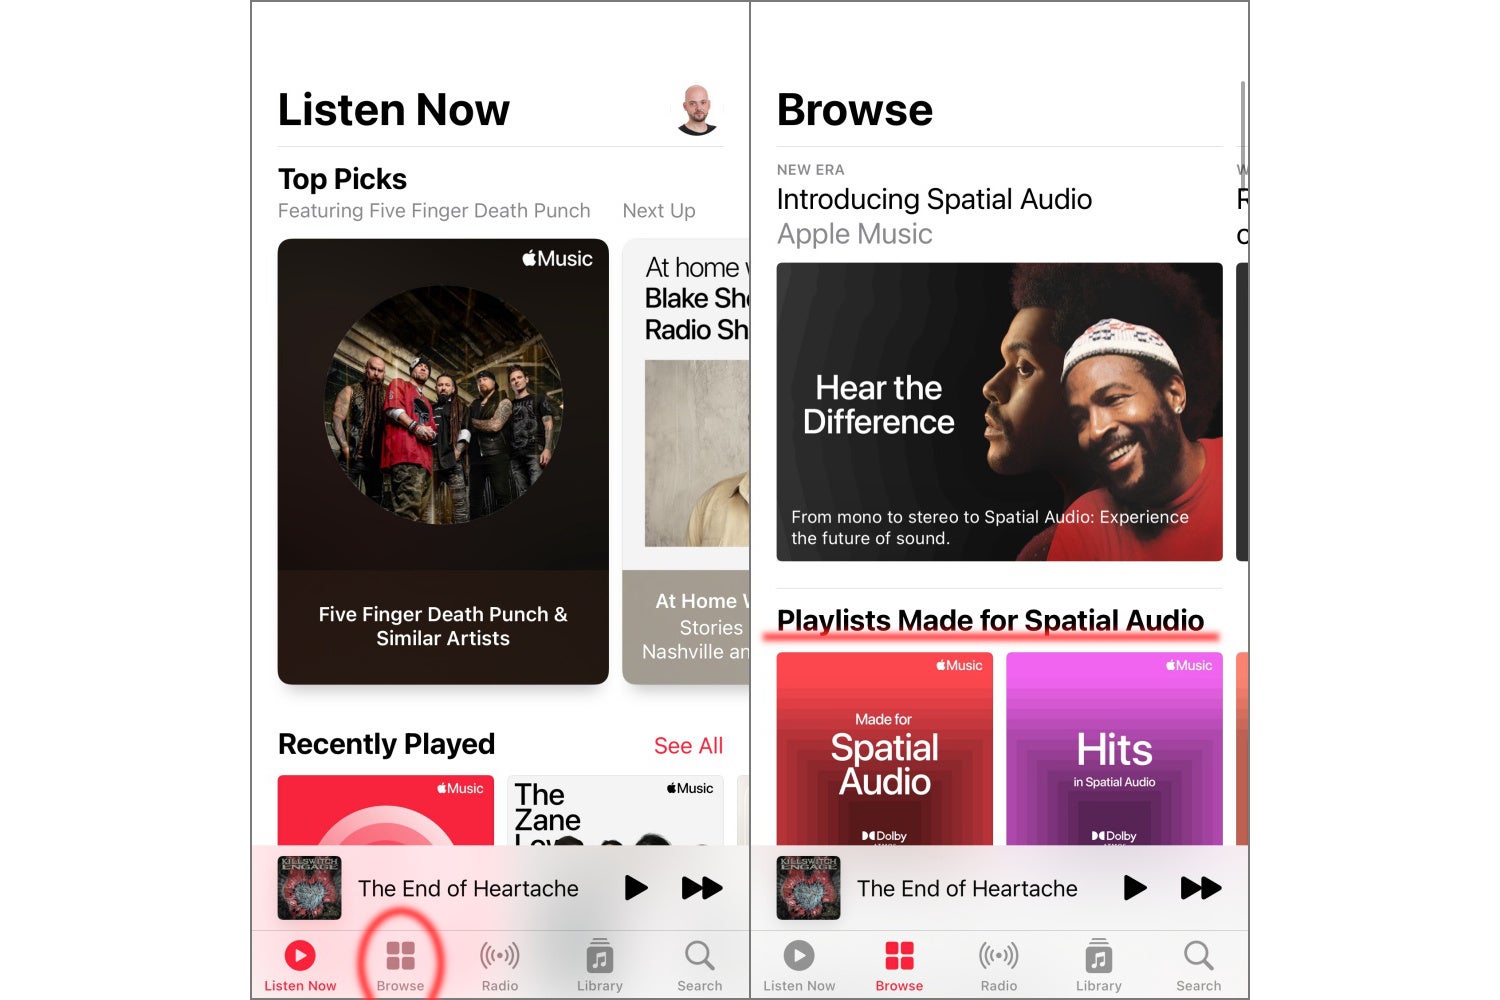 Apple Music with Dolby Atmos: how to listen to Spatial Audio tracks?